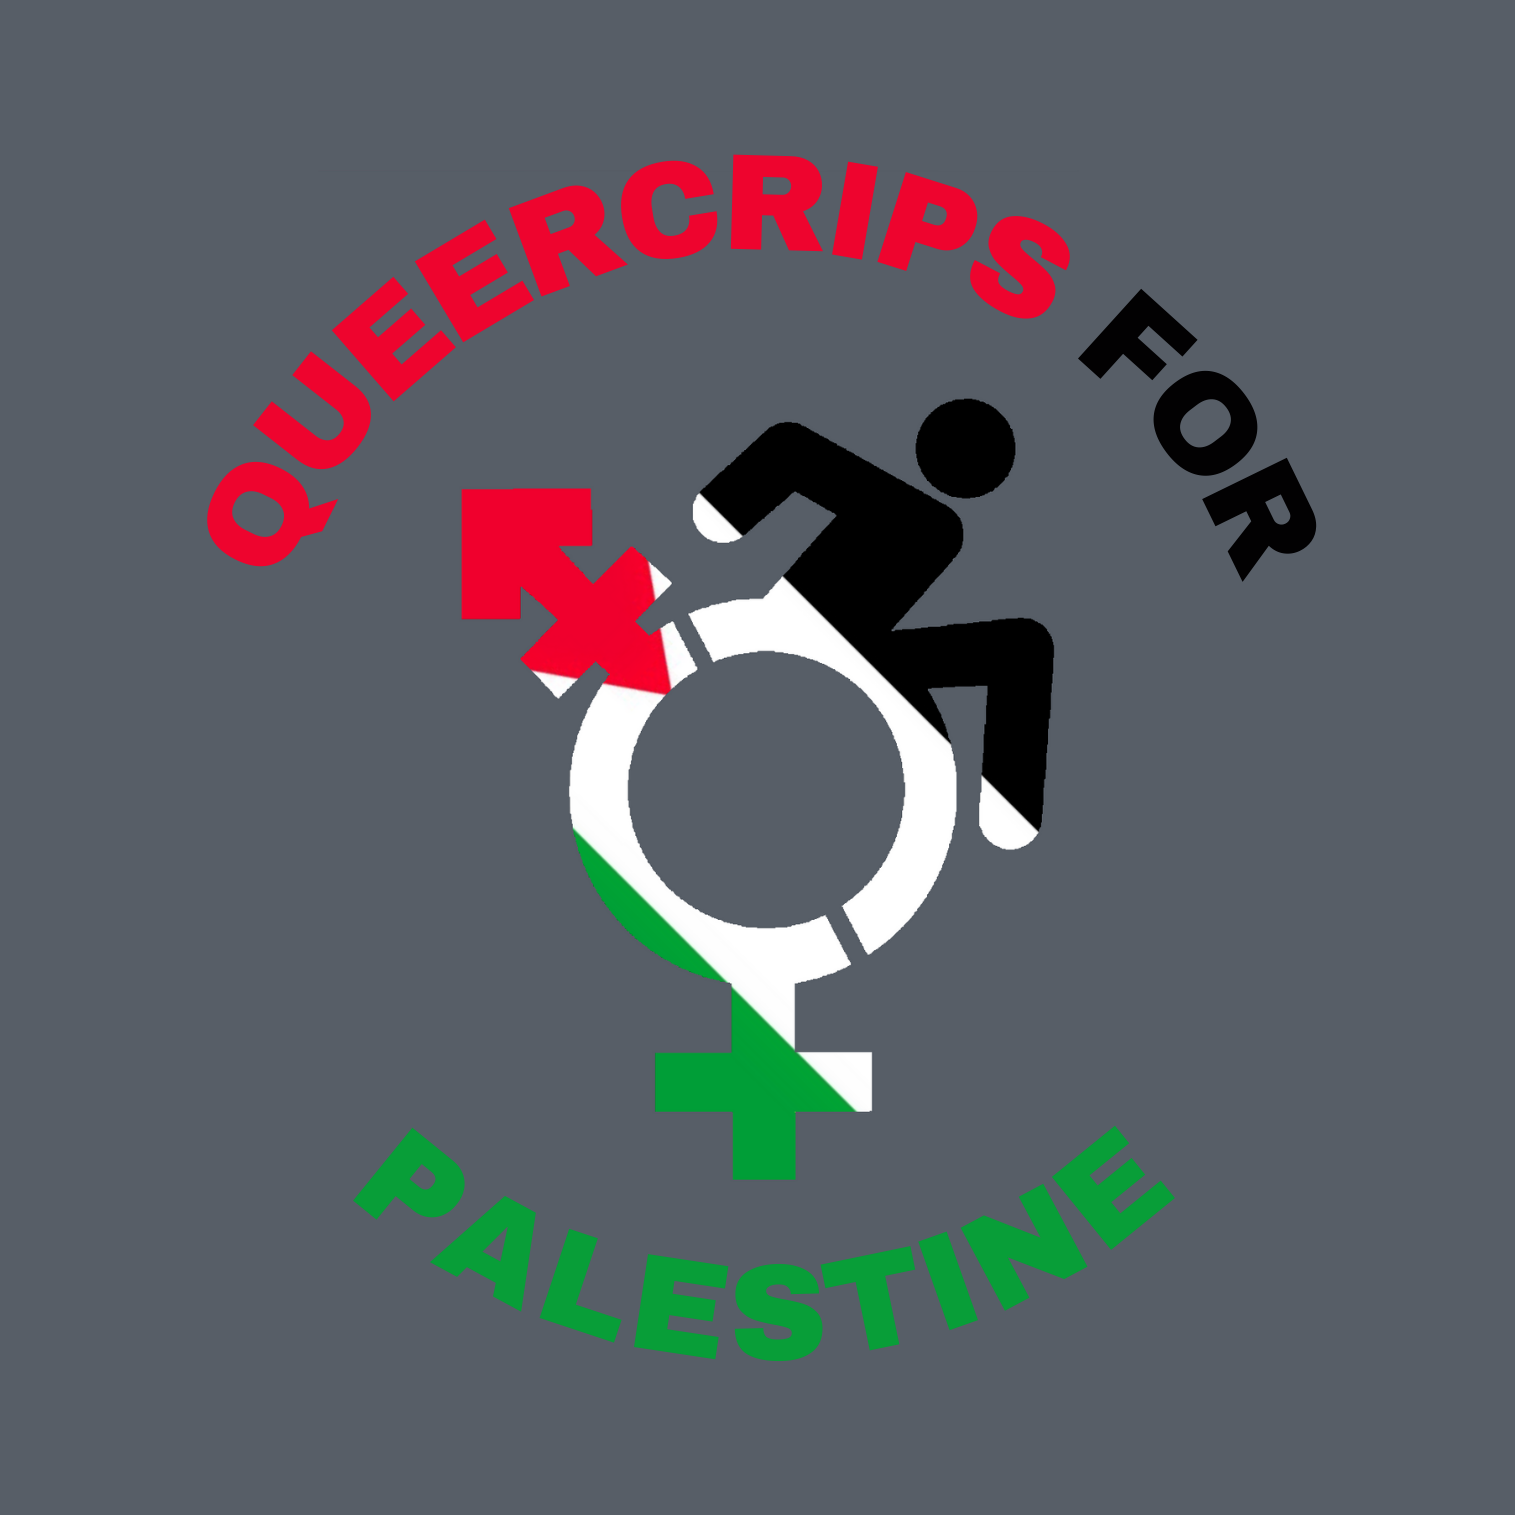 a digital graphic by Sky Cubacub of @RebirthGarments that says “Queercrips for Palestine”, where the words are each in red, black and green. In the center is a QueerCrip symbol which is a mashup of the newer accessibility icon and the trans symbol ( Queercrip symbol designed in 2016 also by Sky). This Queercrip symbol has a Palestinian flag filling in the symbol diagonally